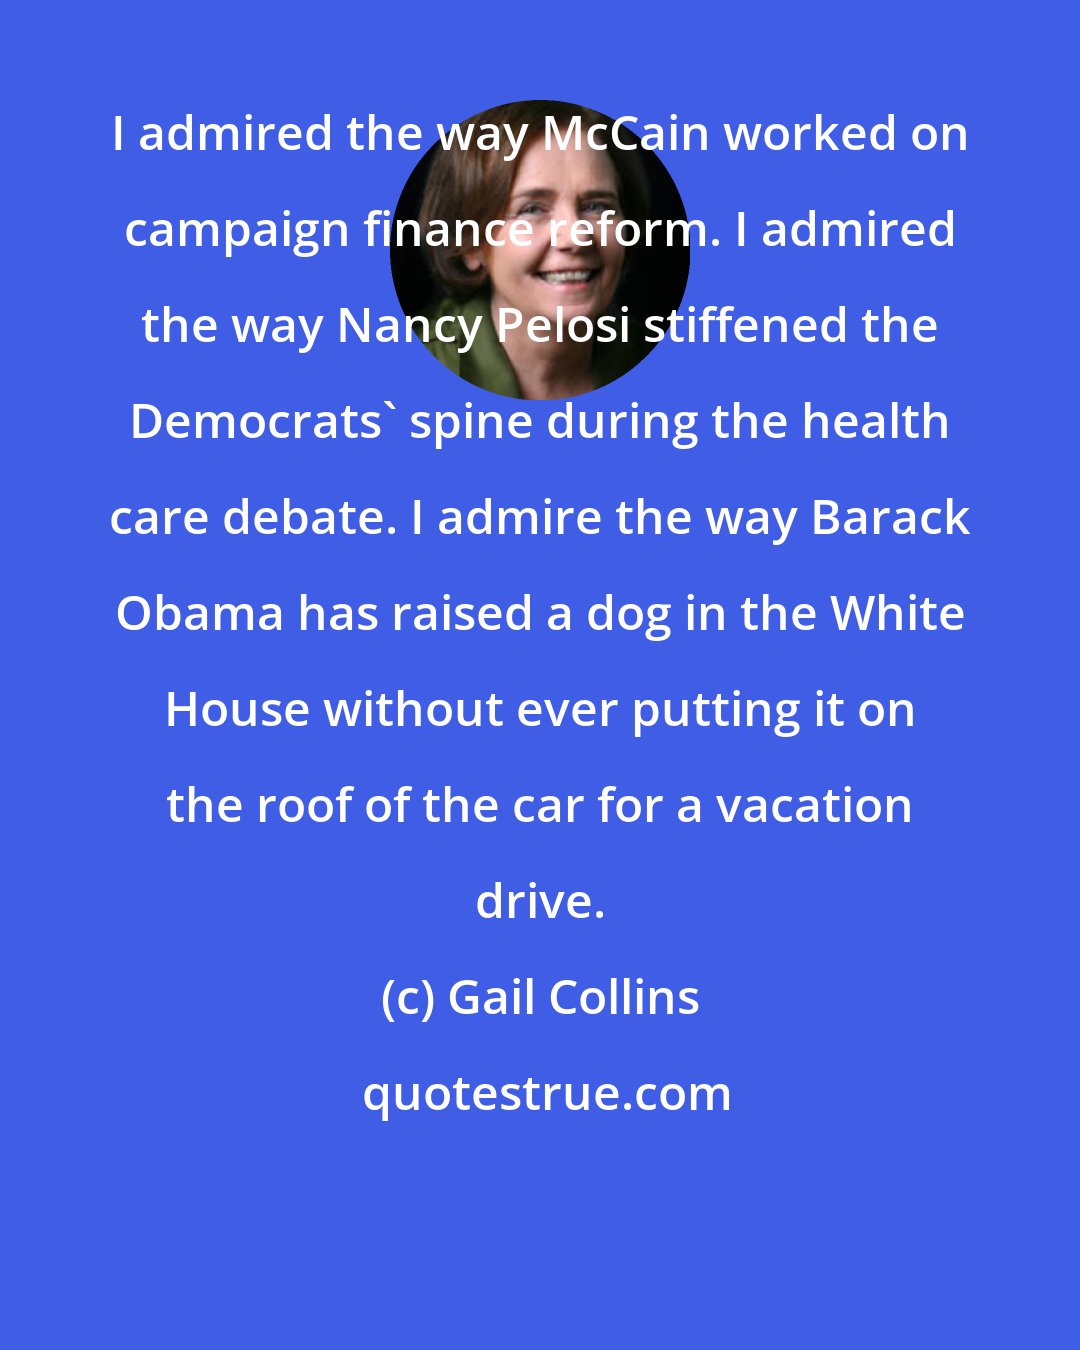 Gail Collins: I admired the way McCain worked on campaign finance reform. I admired the way Nancy Pelosi stiffened the Democrats' spine during the health care debate. I admire the way Barack Obama has raised a dog in the White House without ever putting it on the roof of the car for a vacation drive.